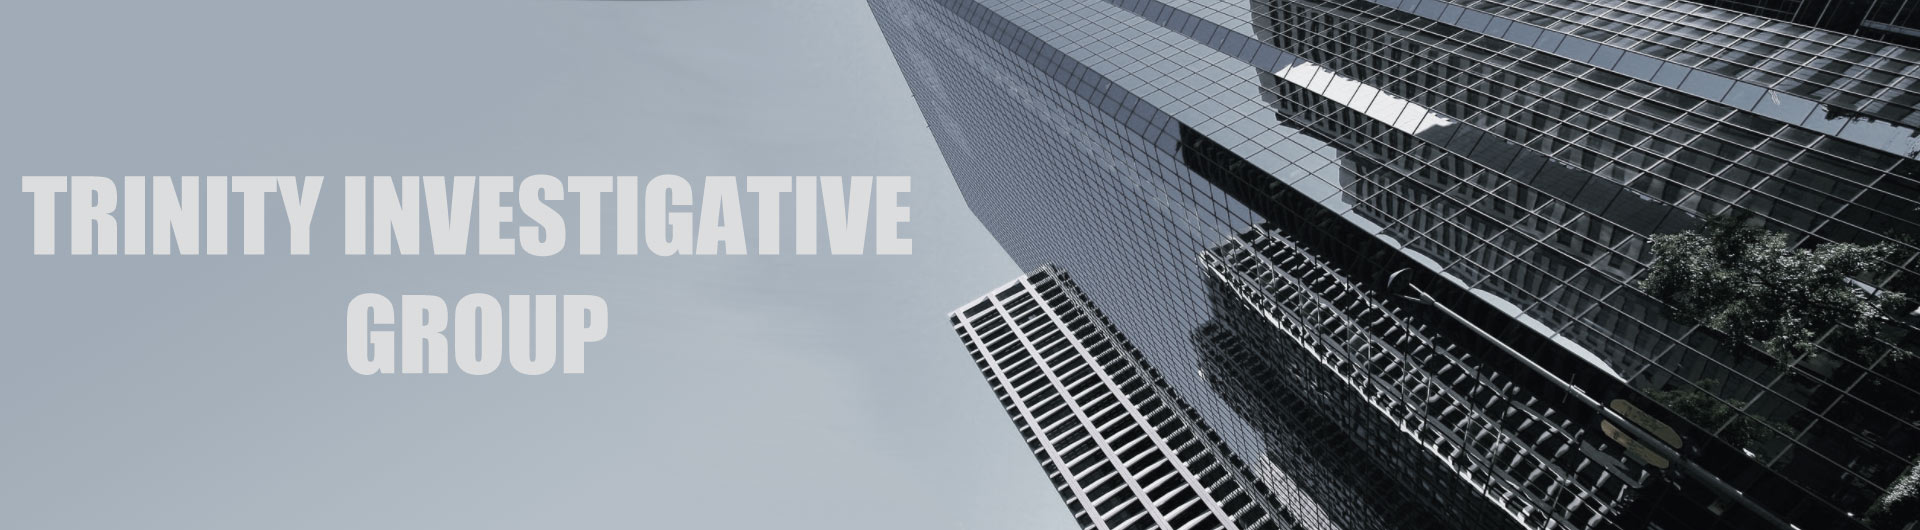 A view of tall buildings with the text “Trinity Investigative Group”